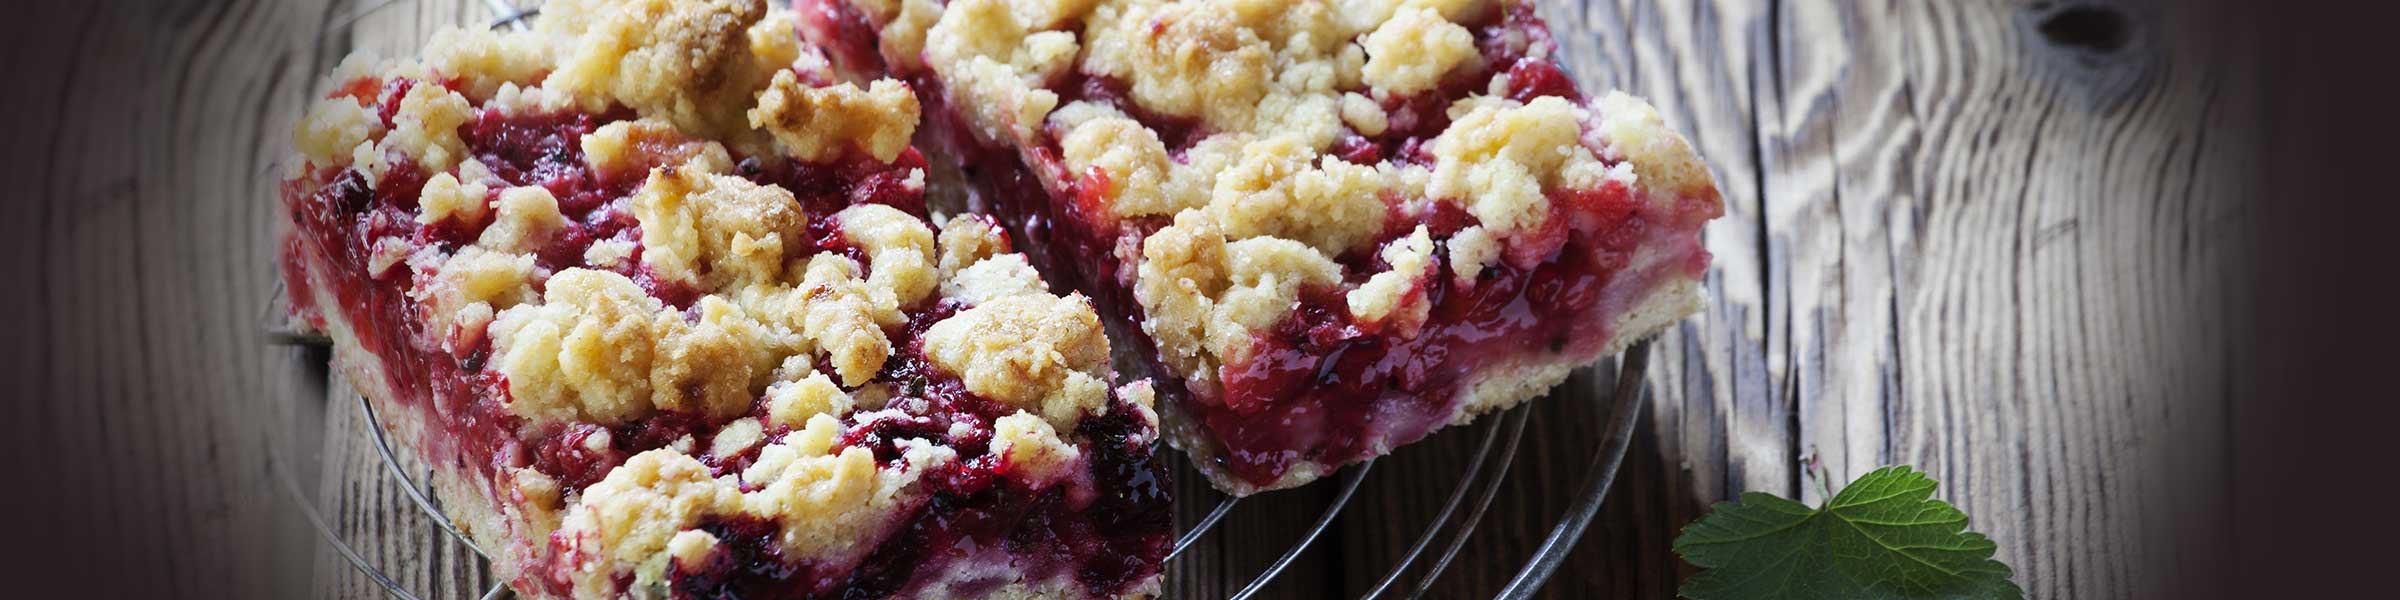 Rodney Strong - Raspberry Crumble Bars